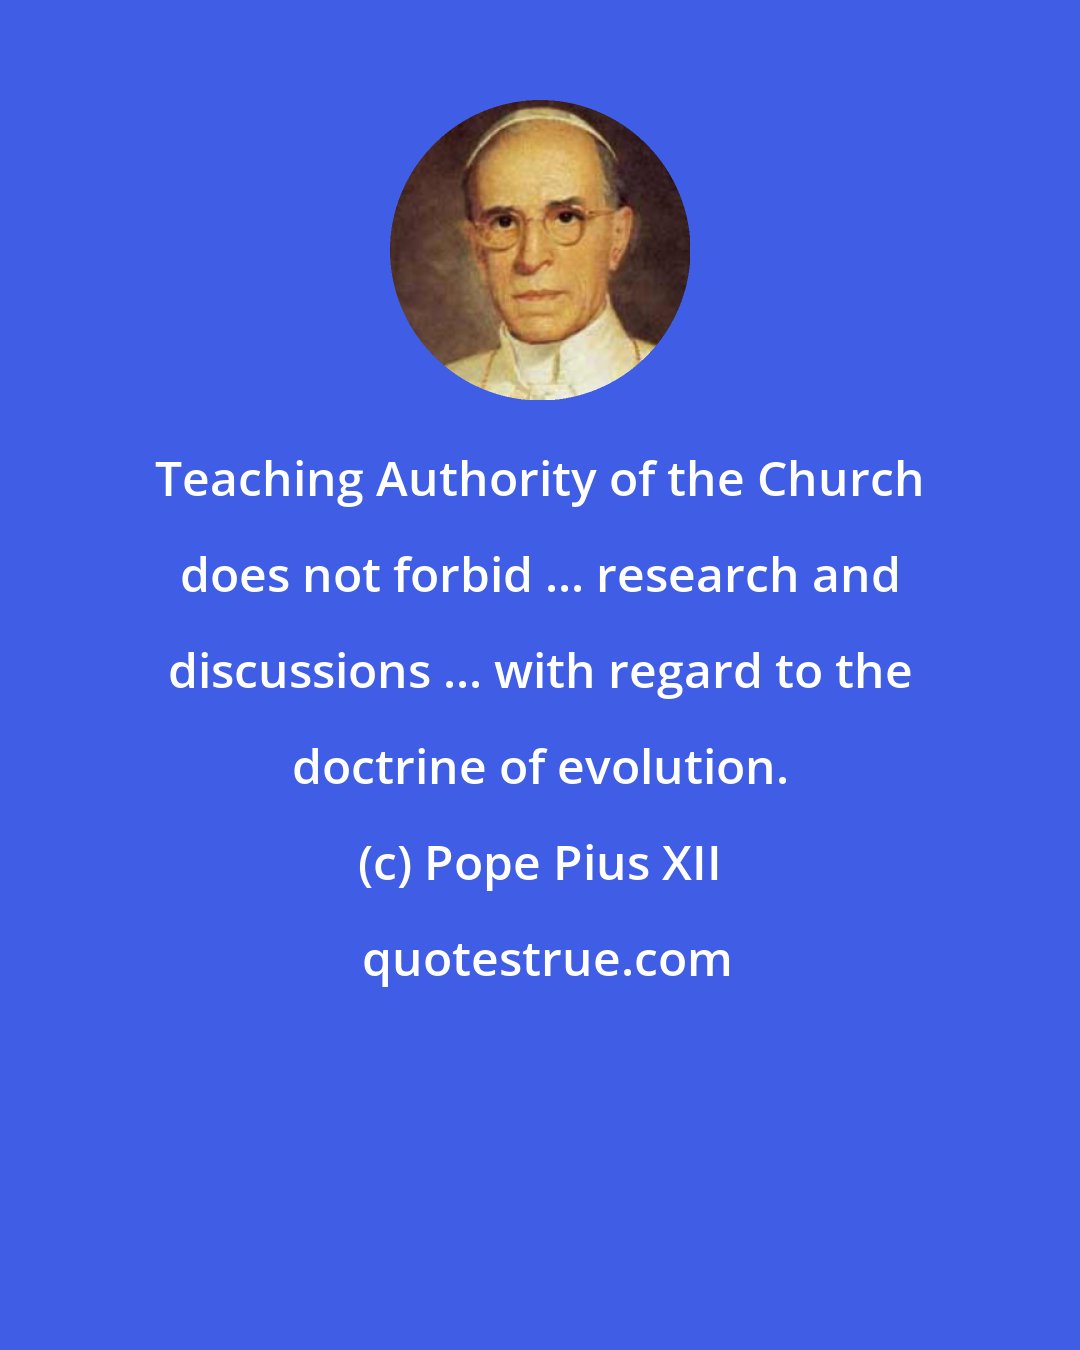 Pope Pius XII: Teaching Authority of the Church does not forbid ... research and discussions ... with regard to the doctrine of evolution.